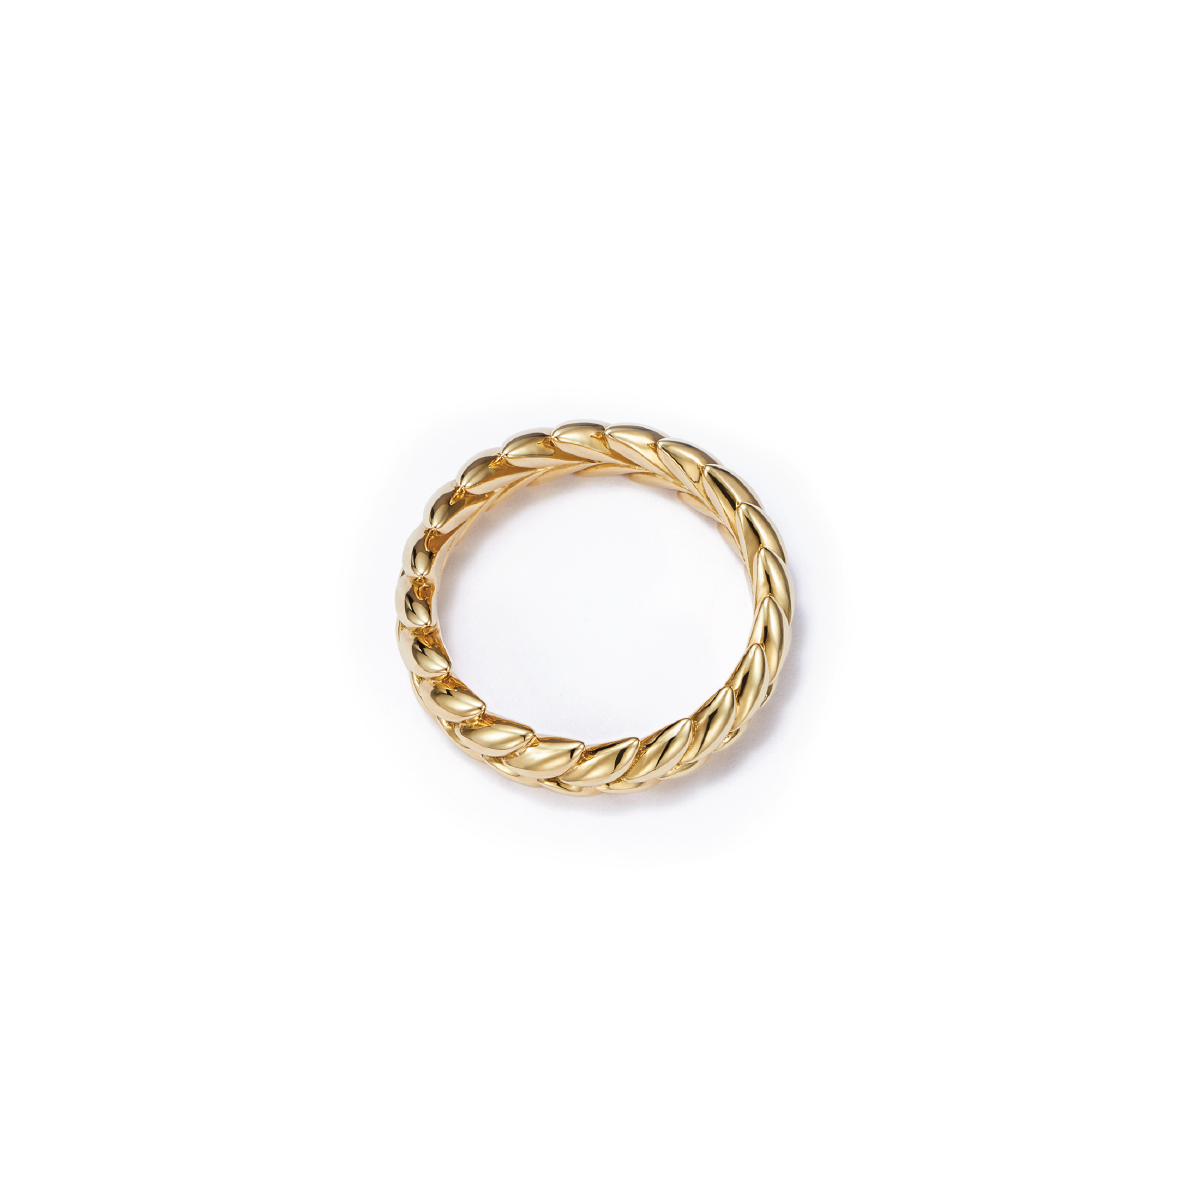 Ethereal Laurel 18kt Certified Fairmined Ecological Gold Wedding Band- Top View